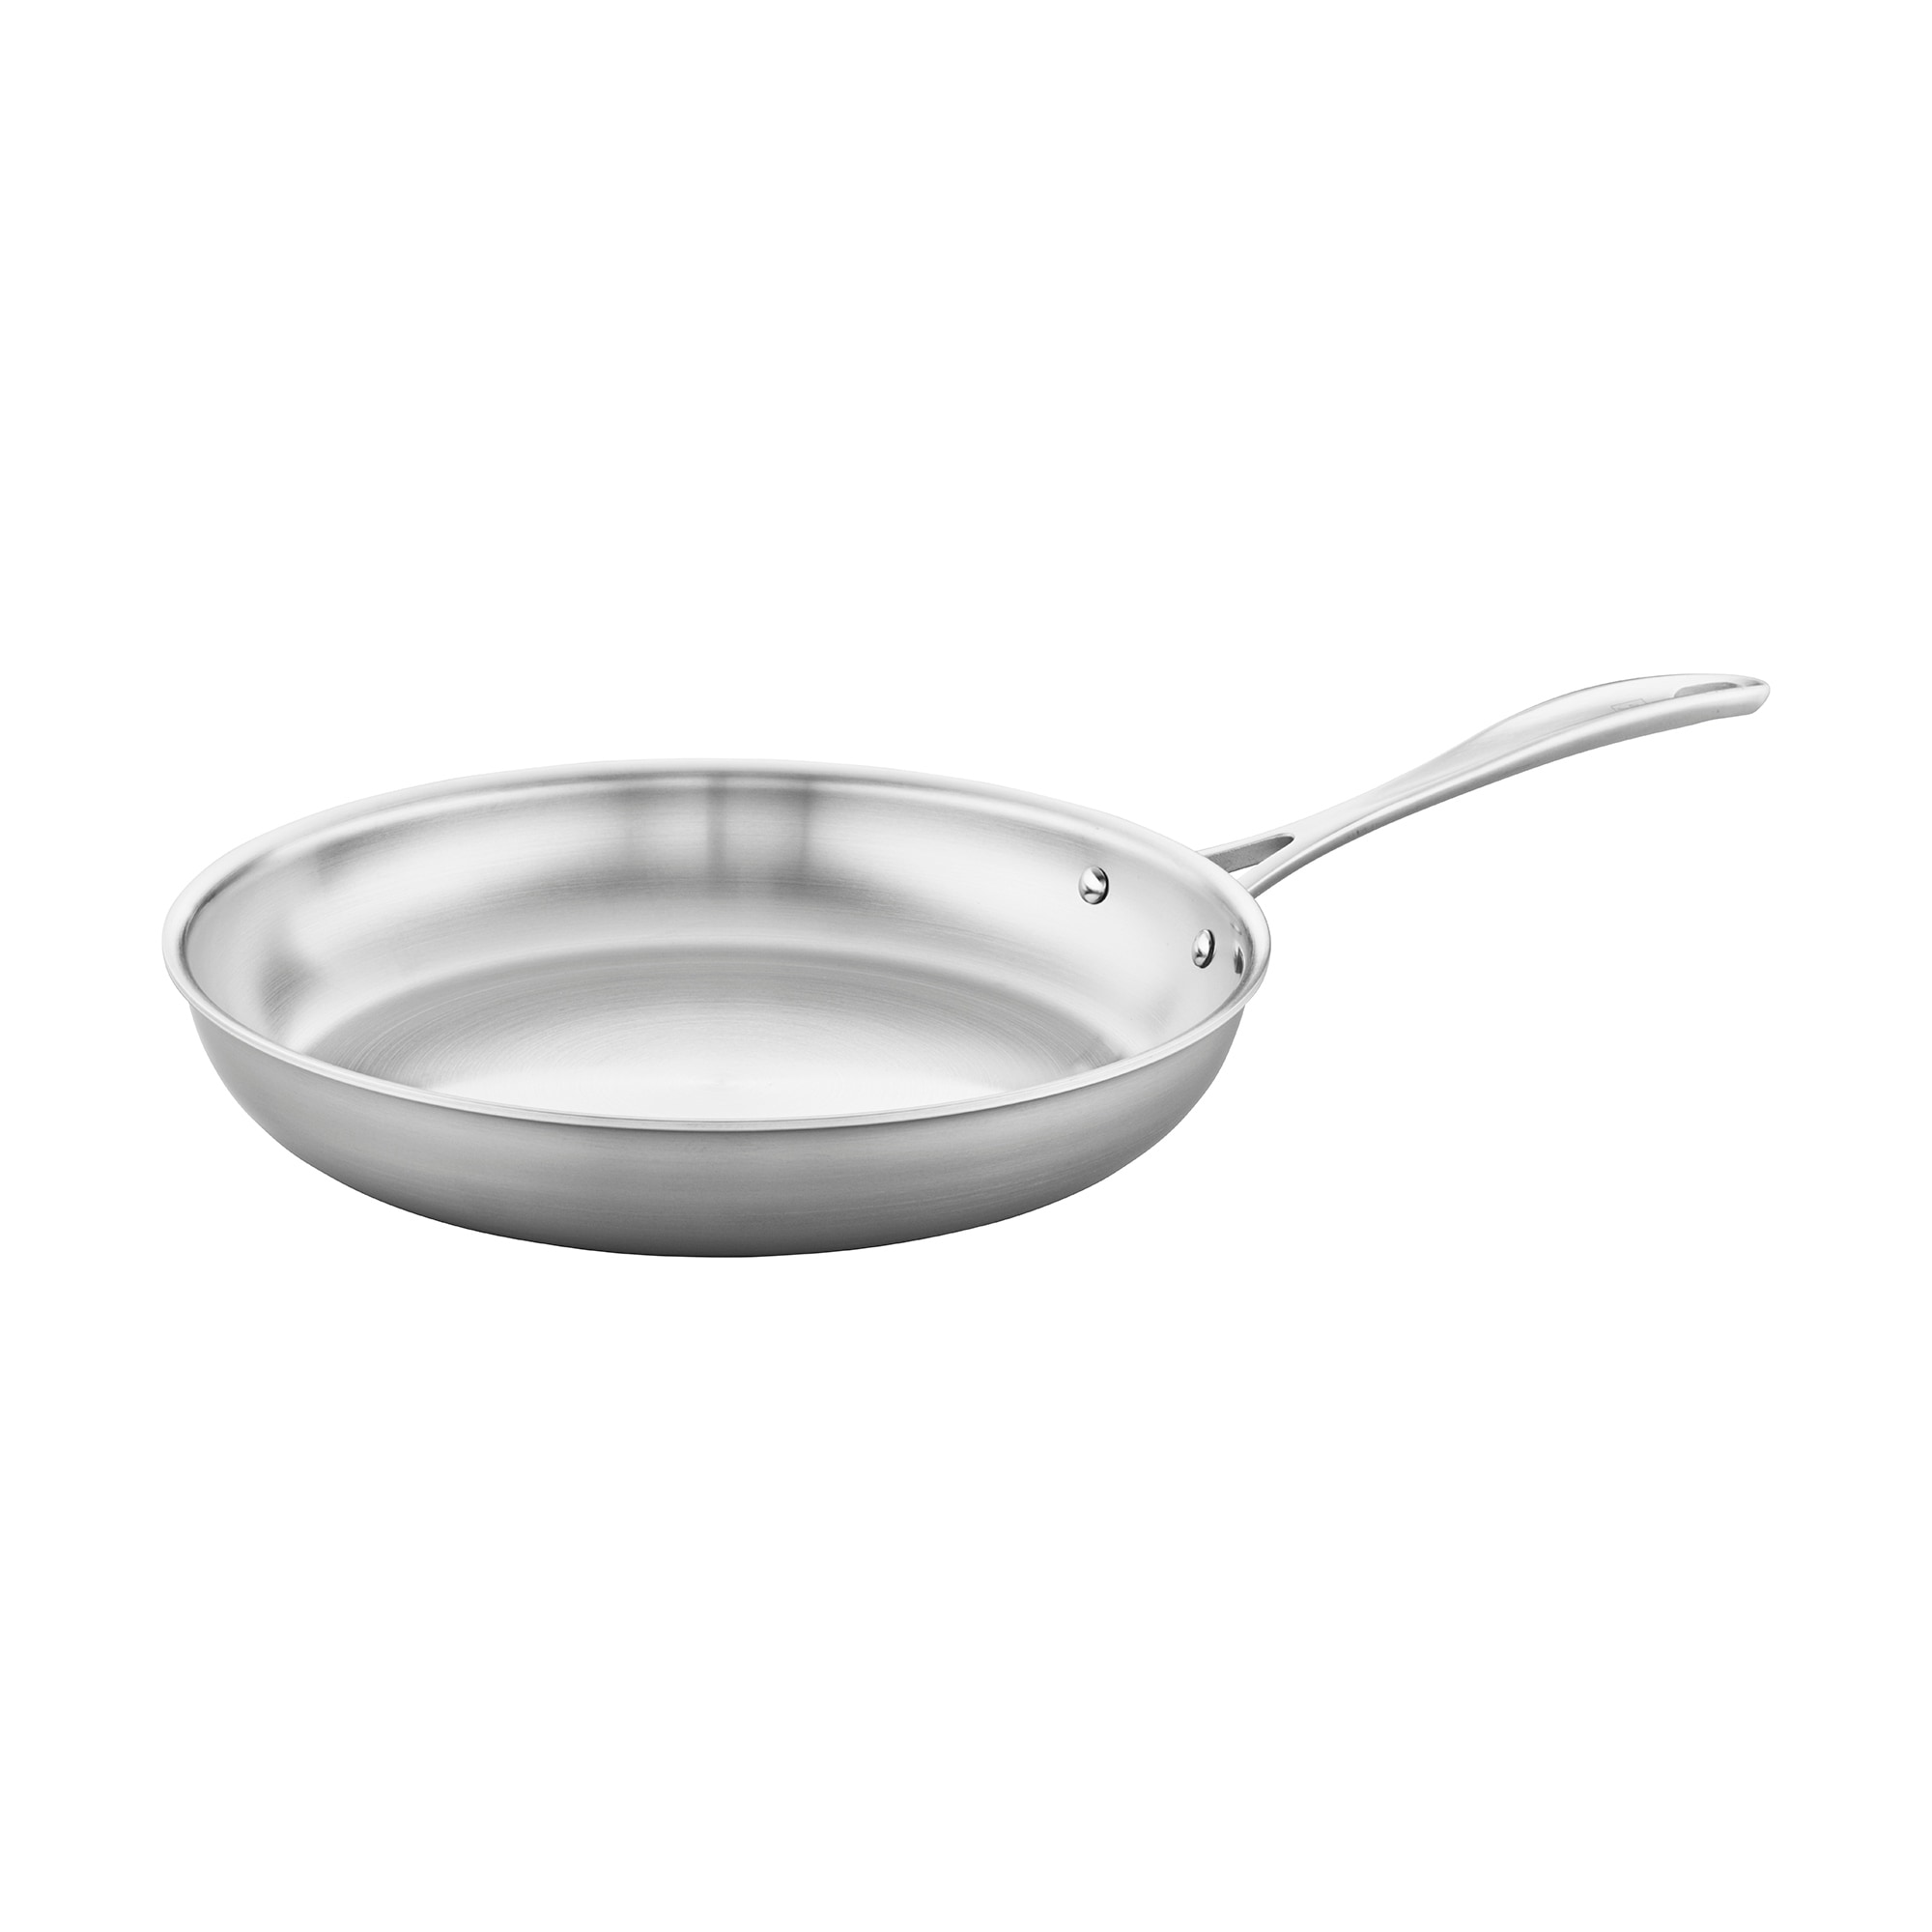 ZWILLING Spirit 3-ply 9.5-inch Stainless Steel Ceramic Nonstick Fry Pan  with Lid - Bed Bath & Beyond - 14058882